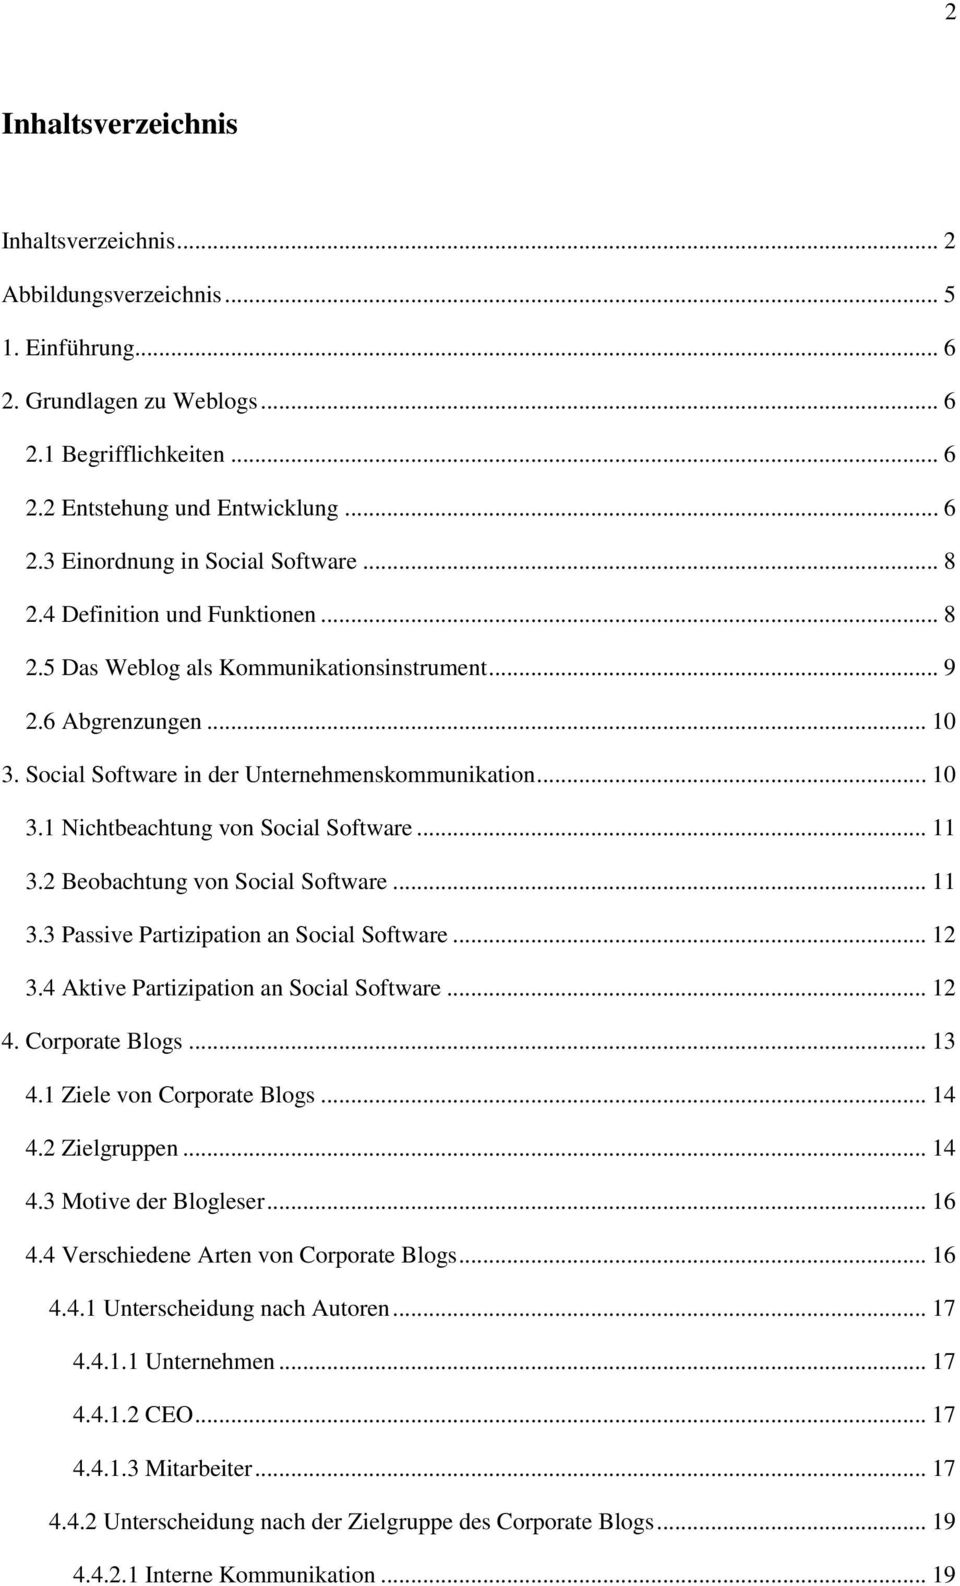 .. 11 3.2 Beobachtung von Social Software... 11 3.3 Passive Partizipation an Social Software... 12 3.4 Aktive Partizipation an Social Software... 12 4. Corporate Blogs... 13 4.